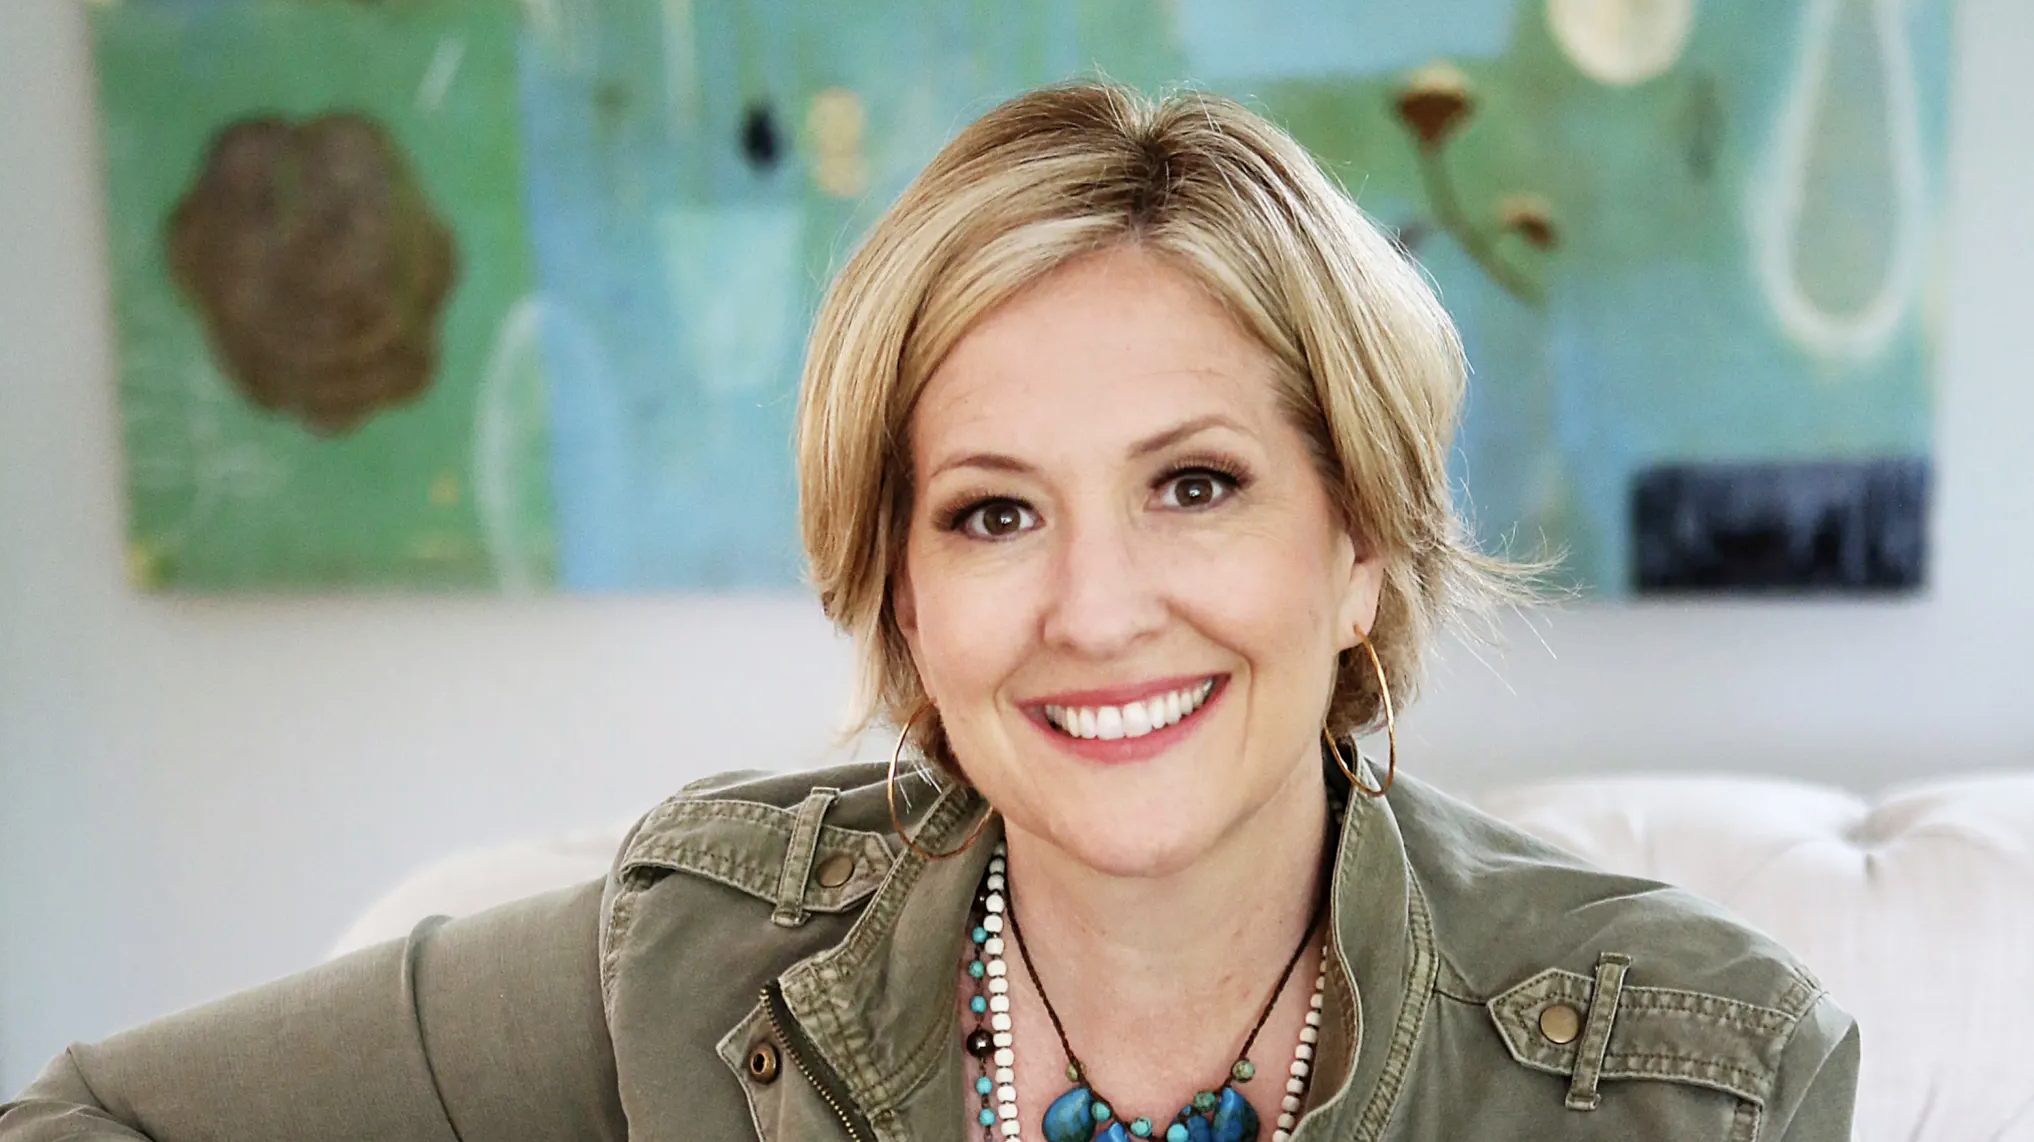 ‘The future of leadership belongs to the brave’, says Brené Brown